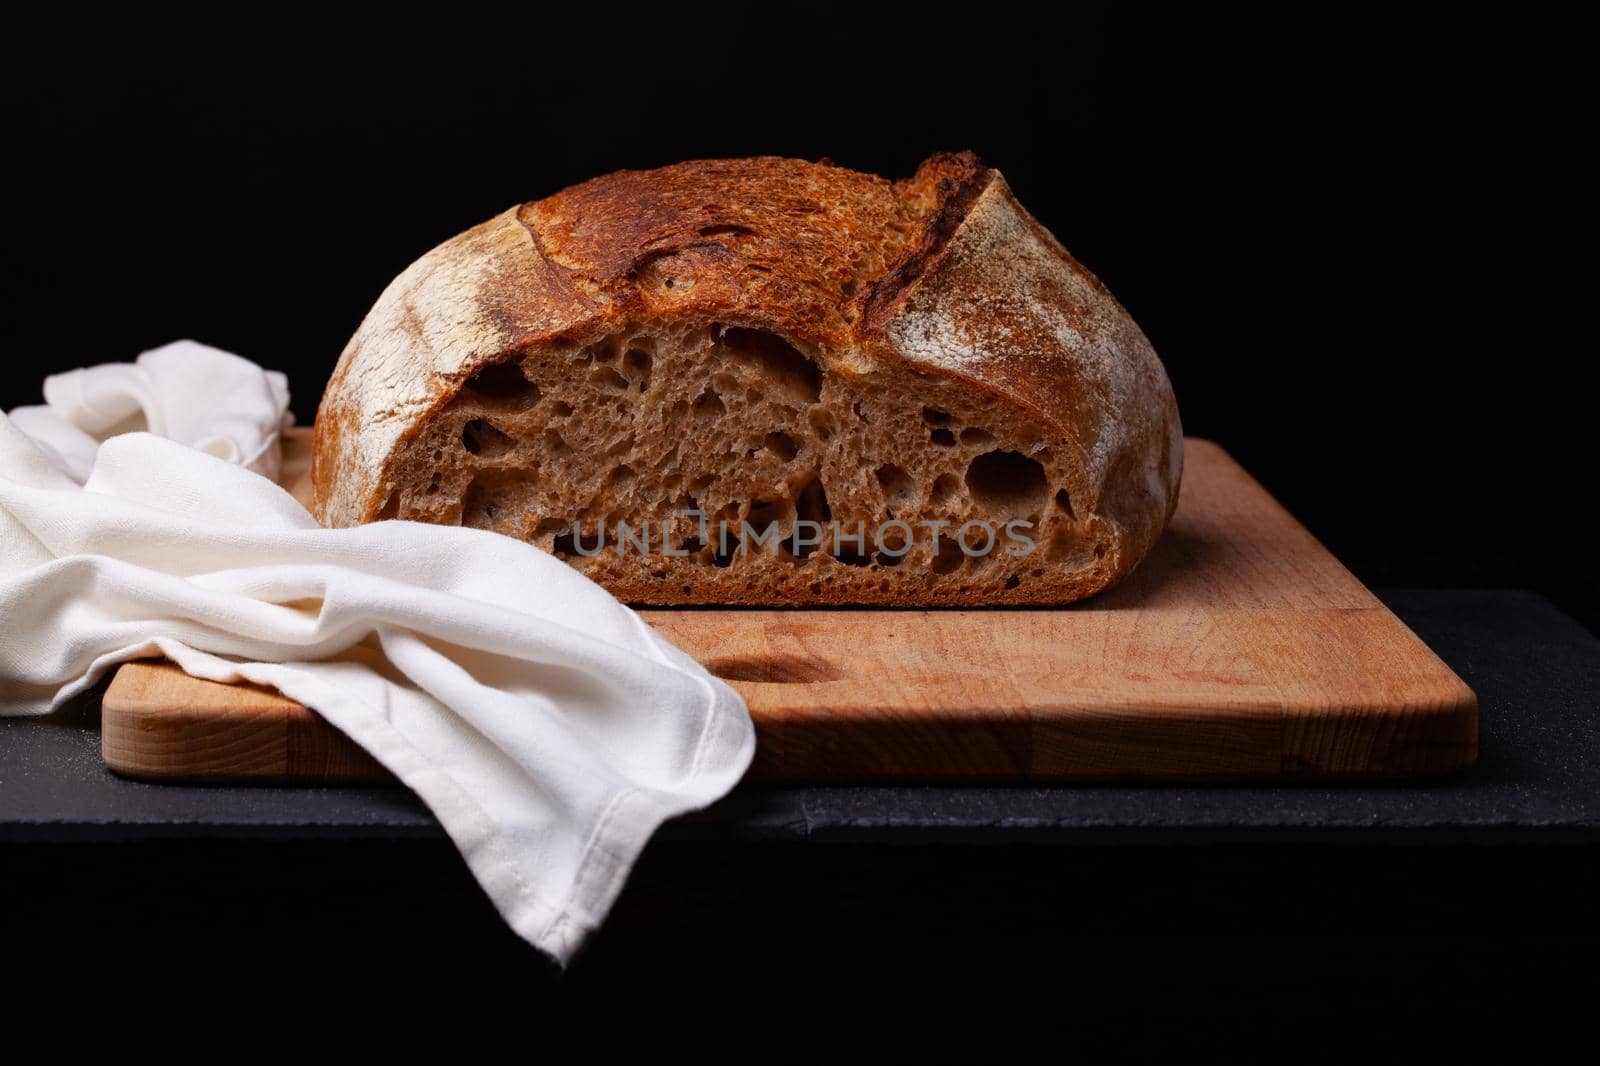 Artisan sourdough bread. Freshly baked round loaf of sourdough bread with linen cloth on black background